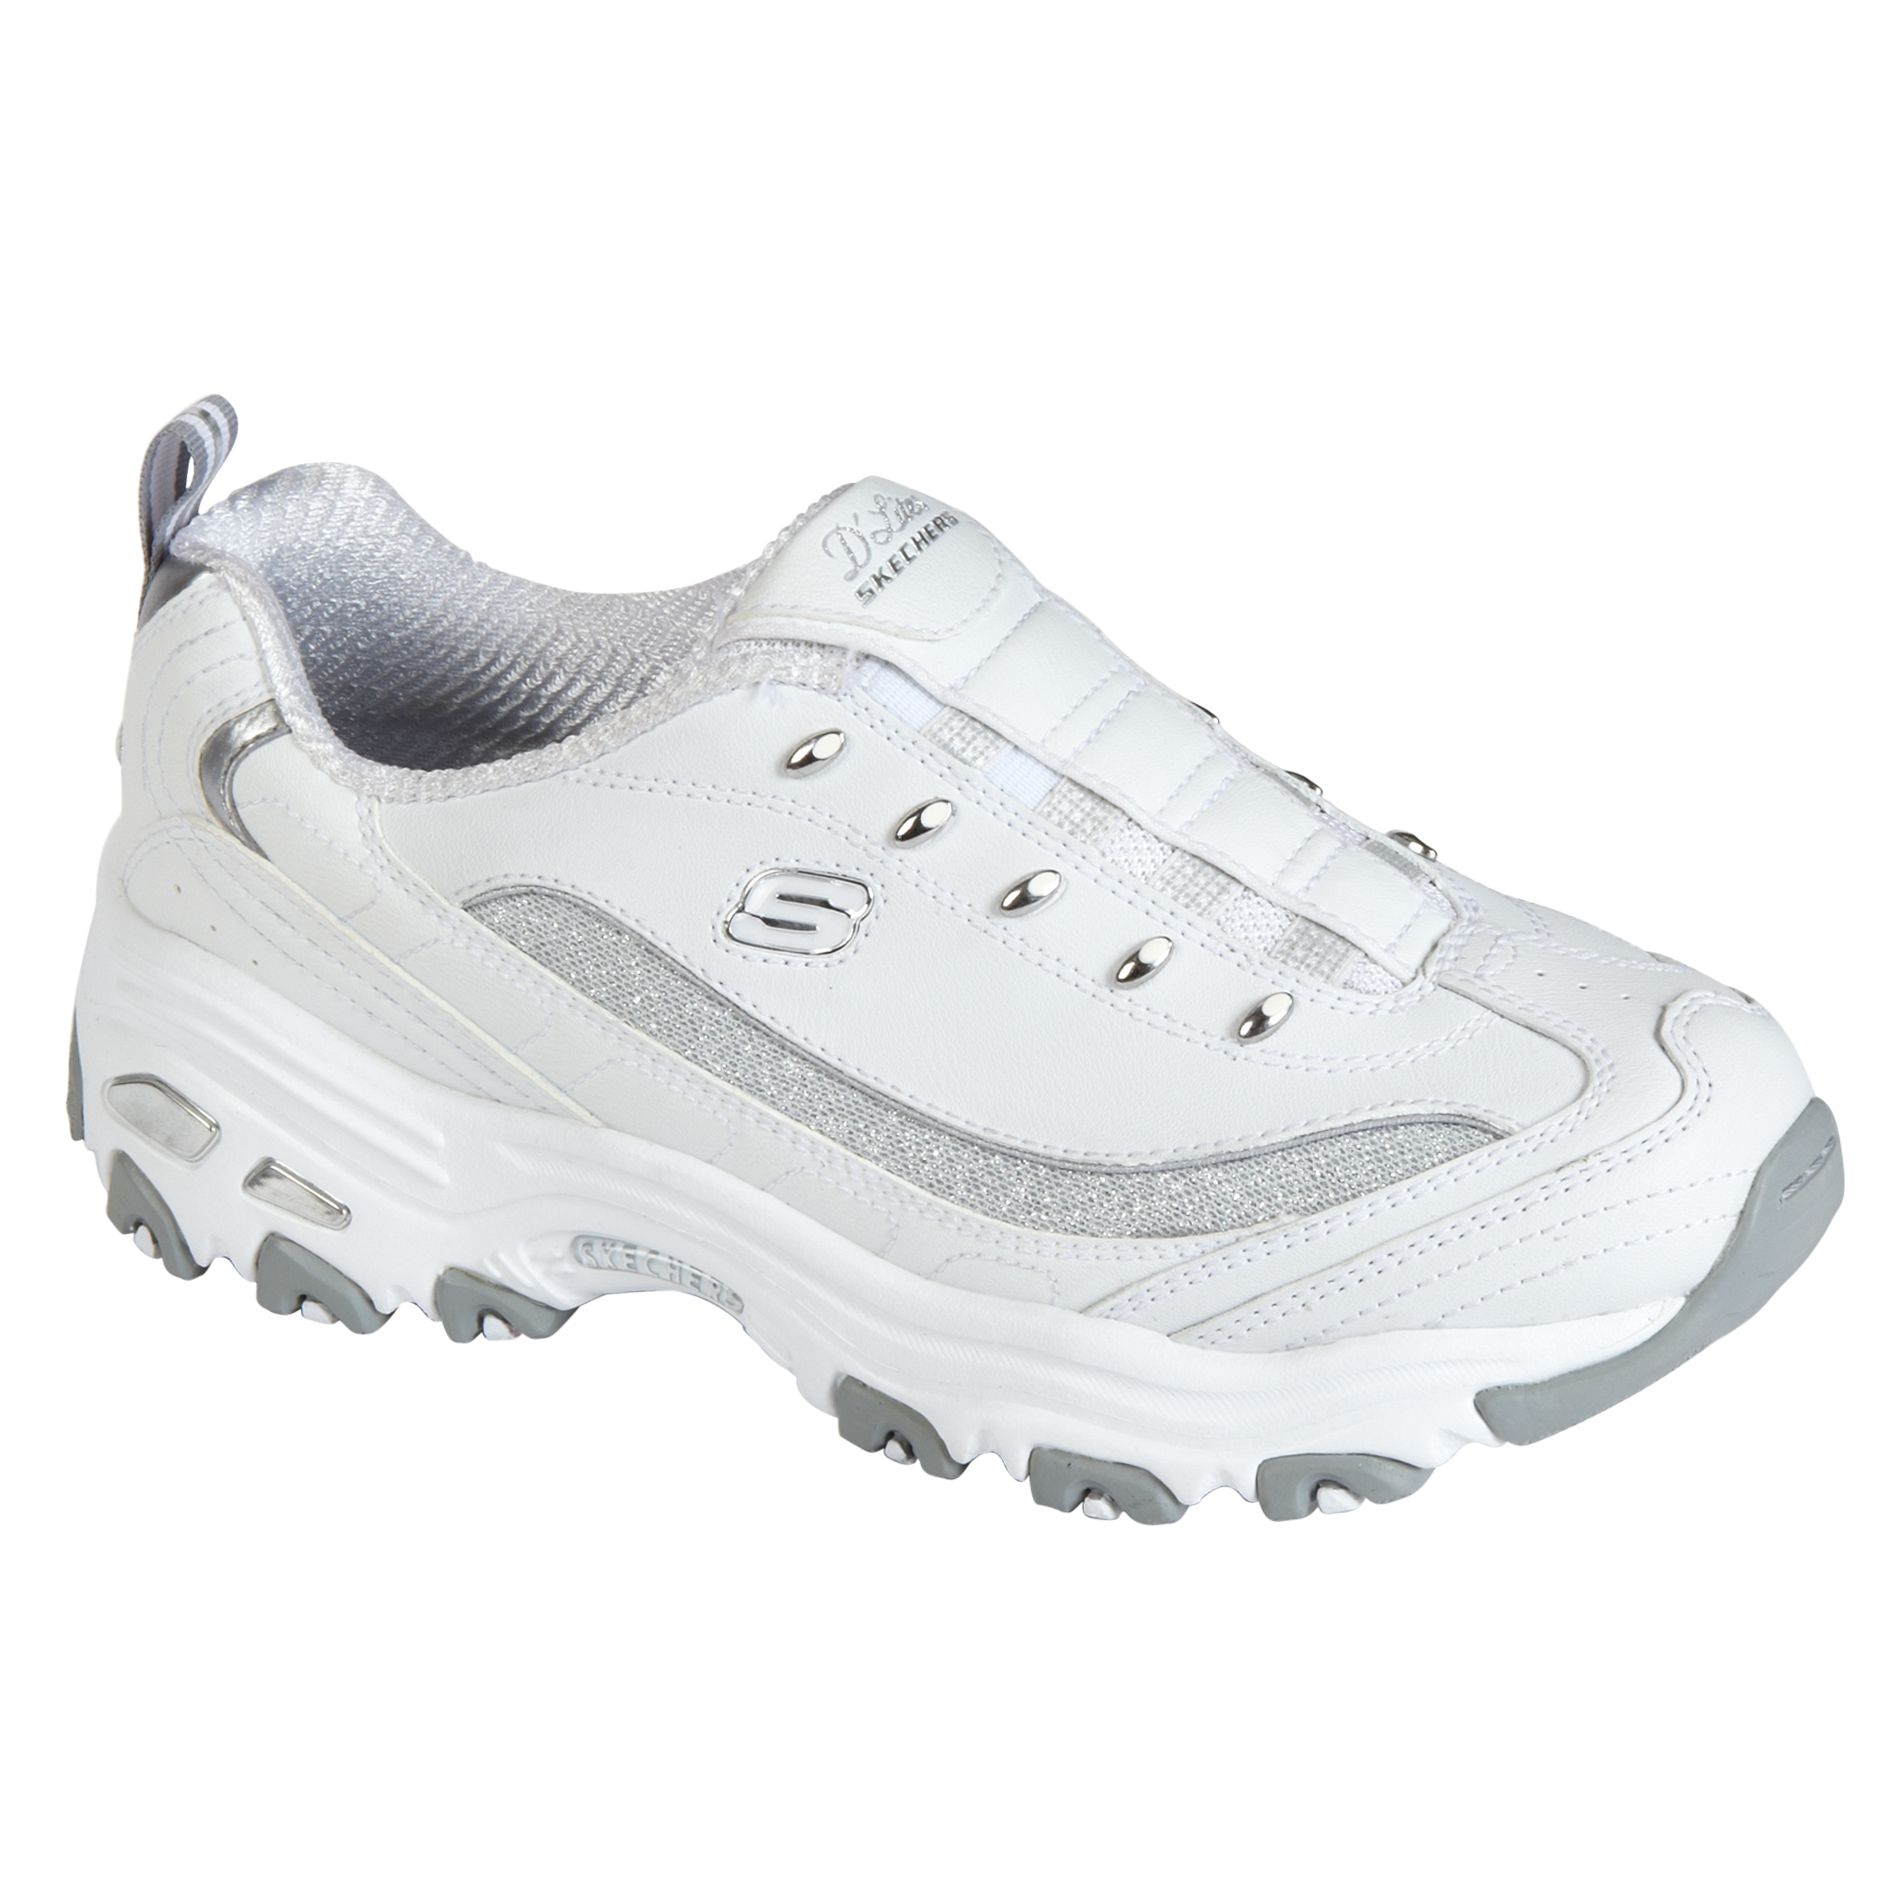 Skechers Women's OMG Casual Athletic Shoe - White | Shop Your Way ...